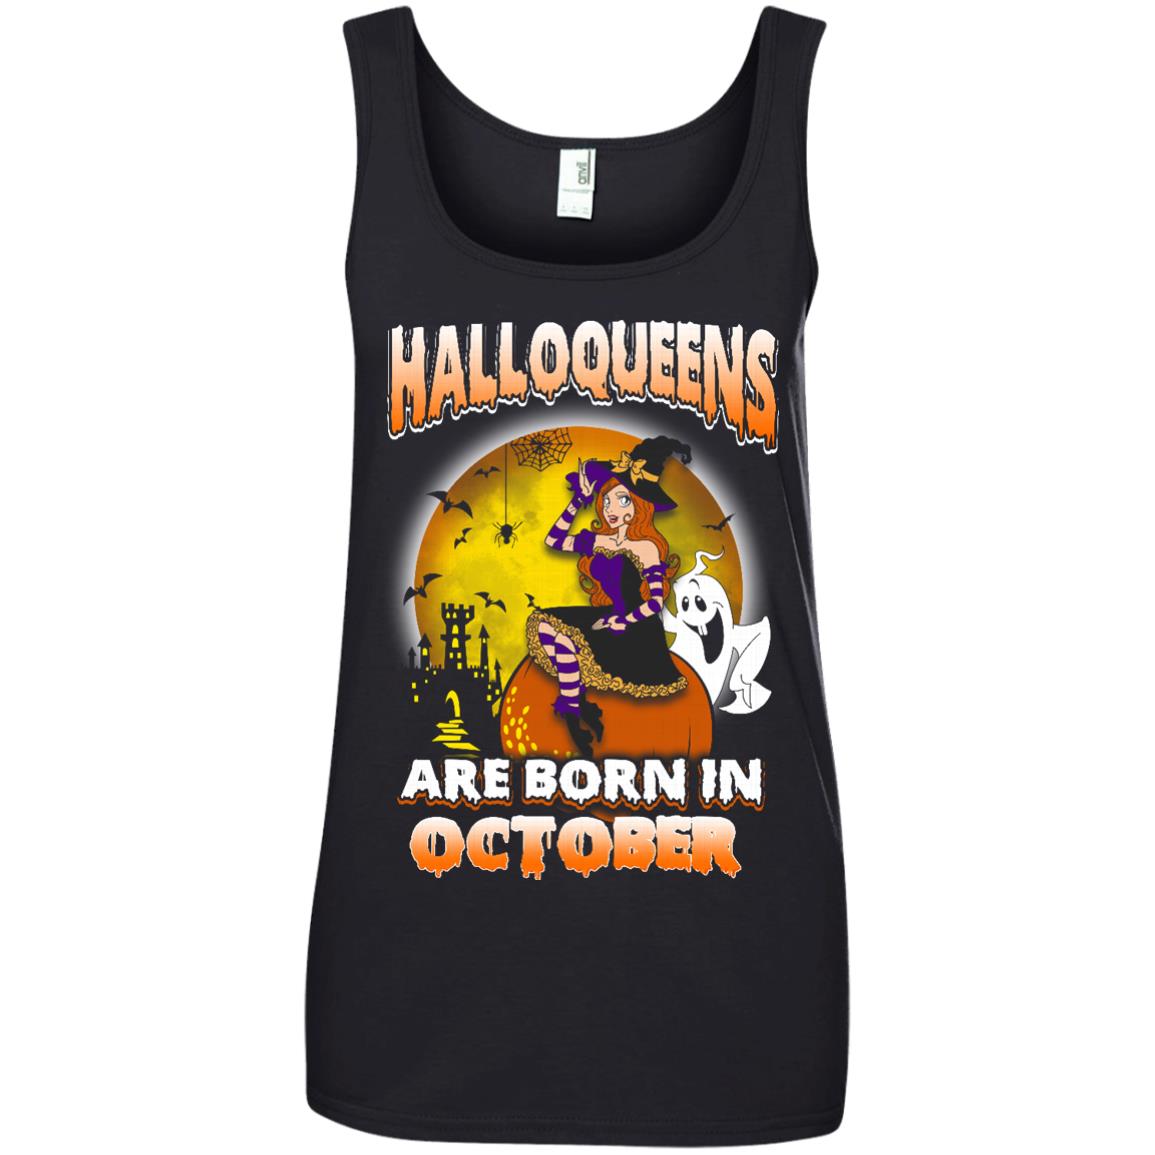 Halloqueens are born in October shirt, hoodie, tank